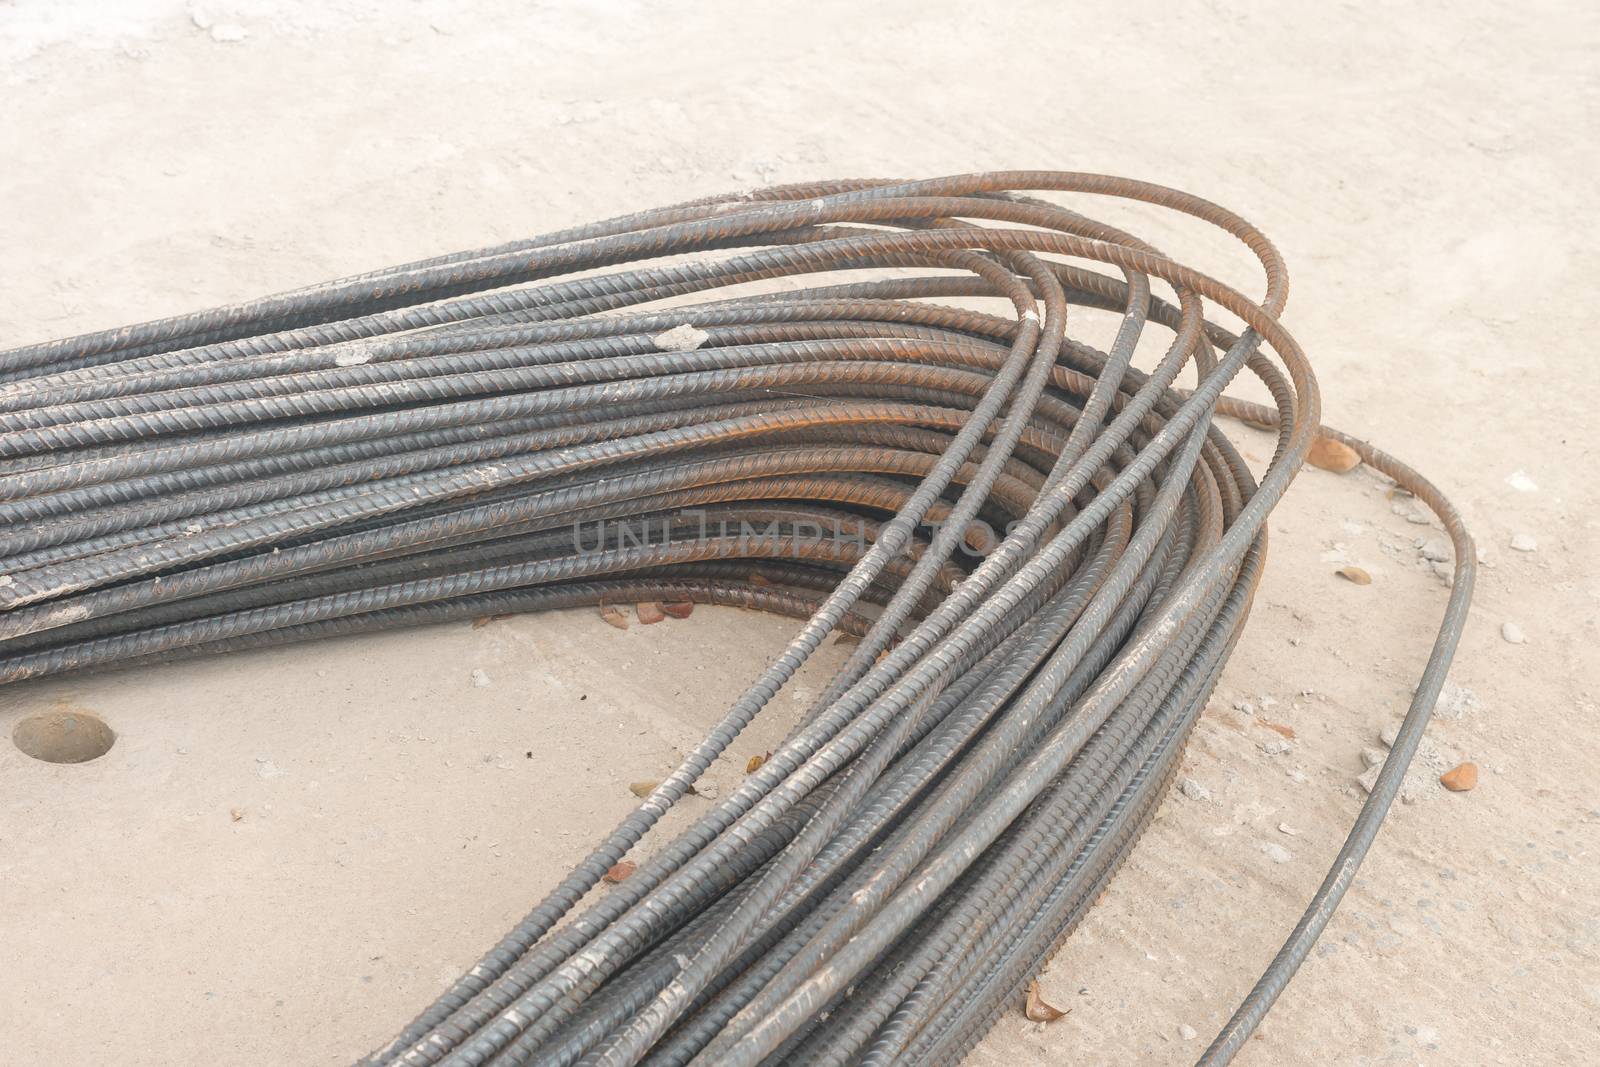 Rebar steel bars, reinforcement concrete bars with wire rod used in foundation of construction site.